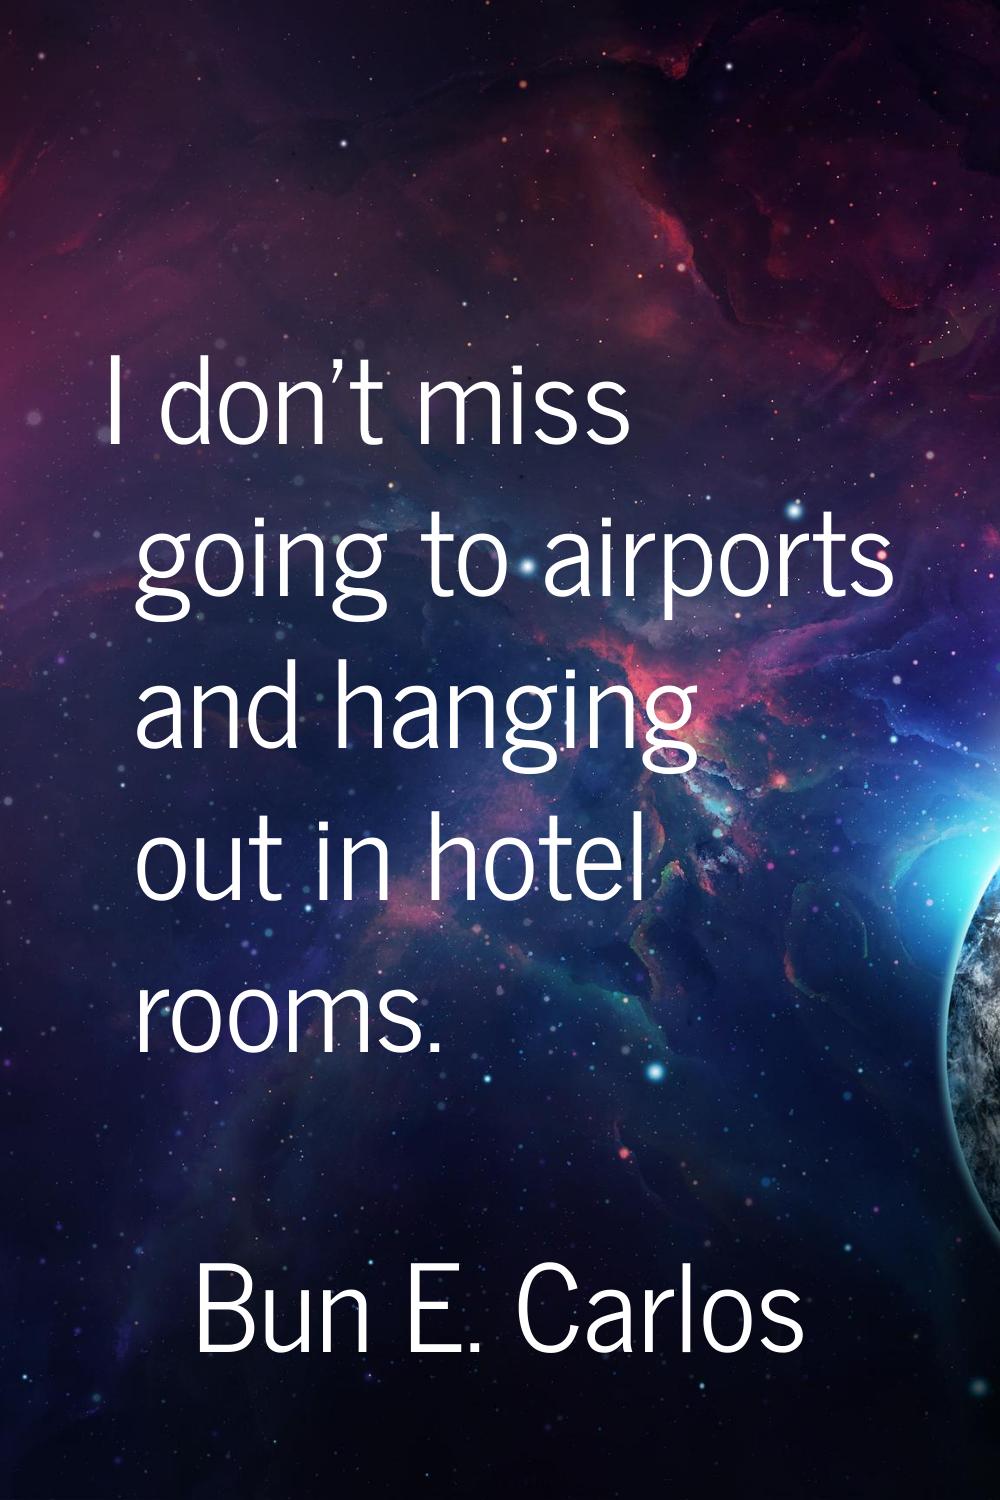 I don't miss going to airports and hanging out in hotel rooms.